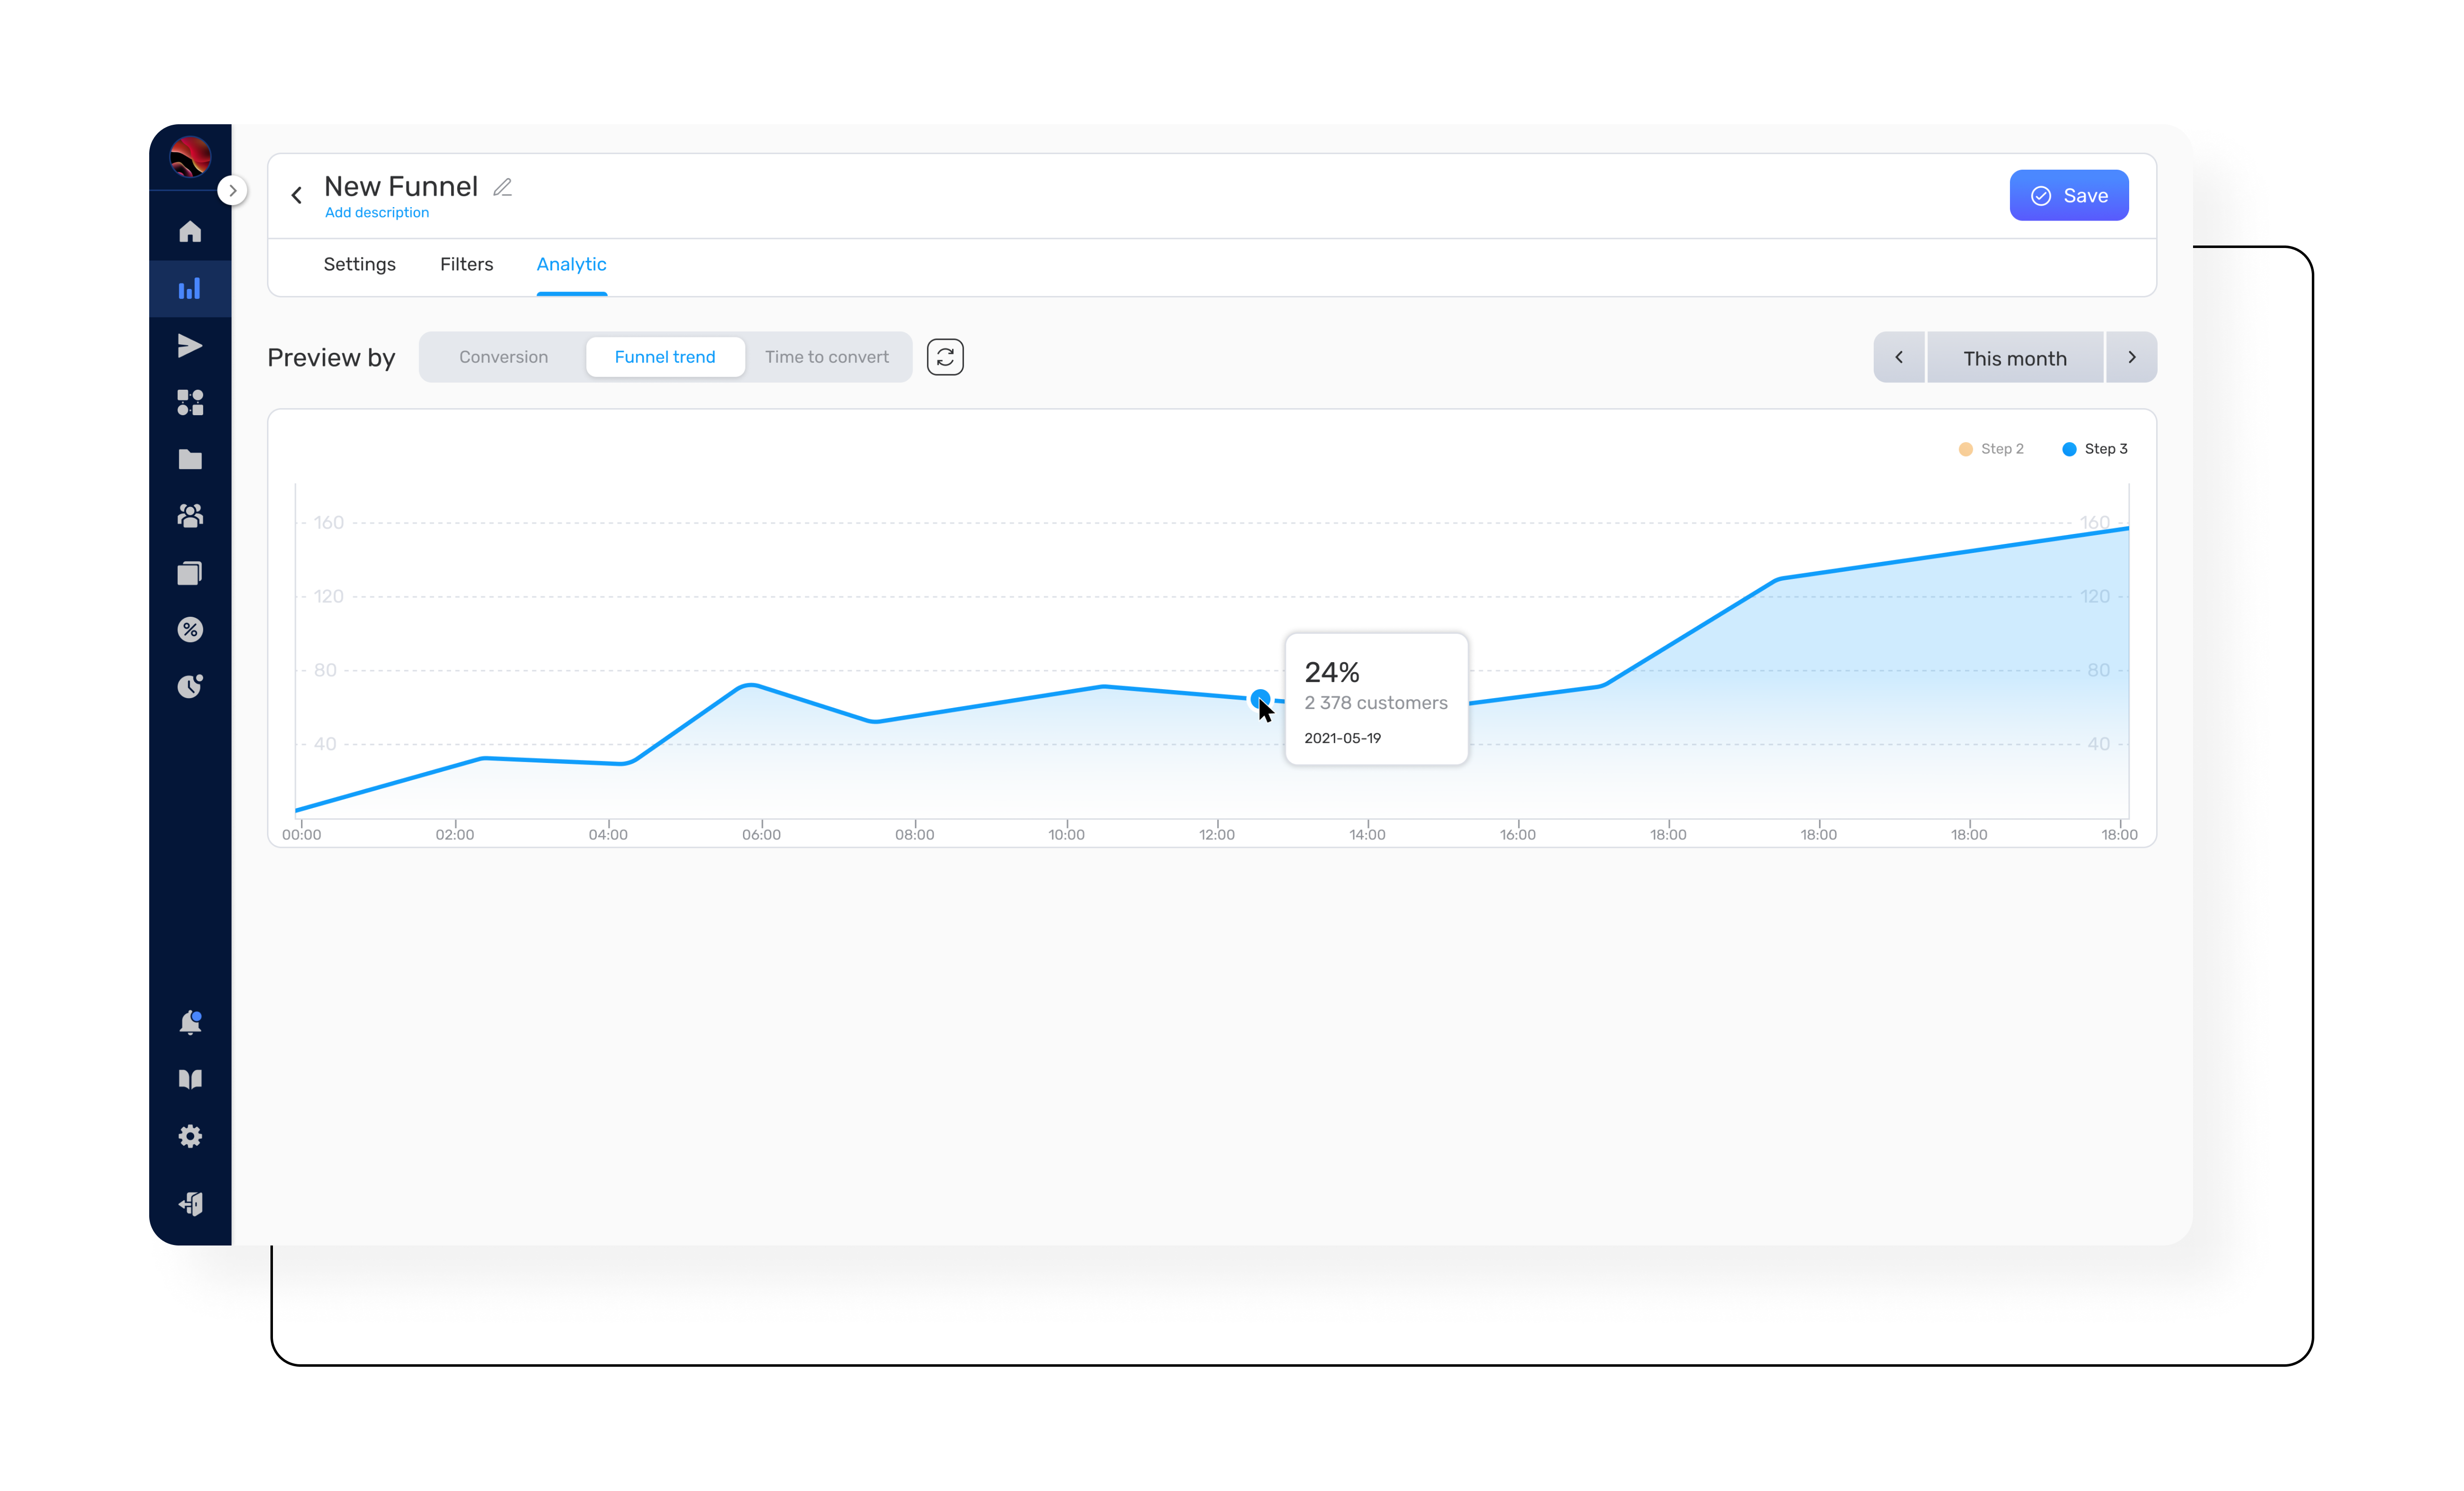 Say hello to the funnel analytics feature.